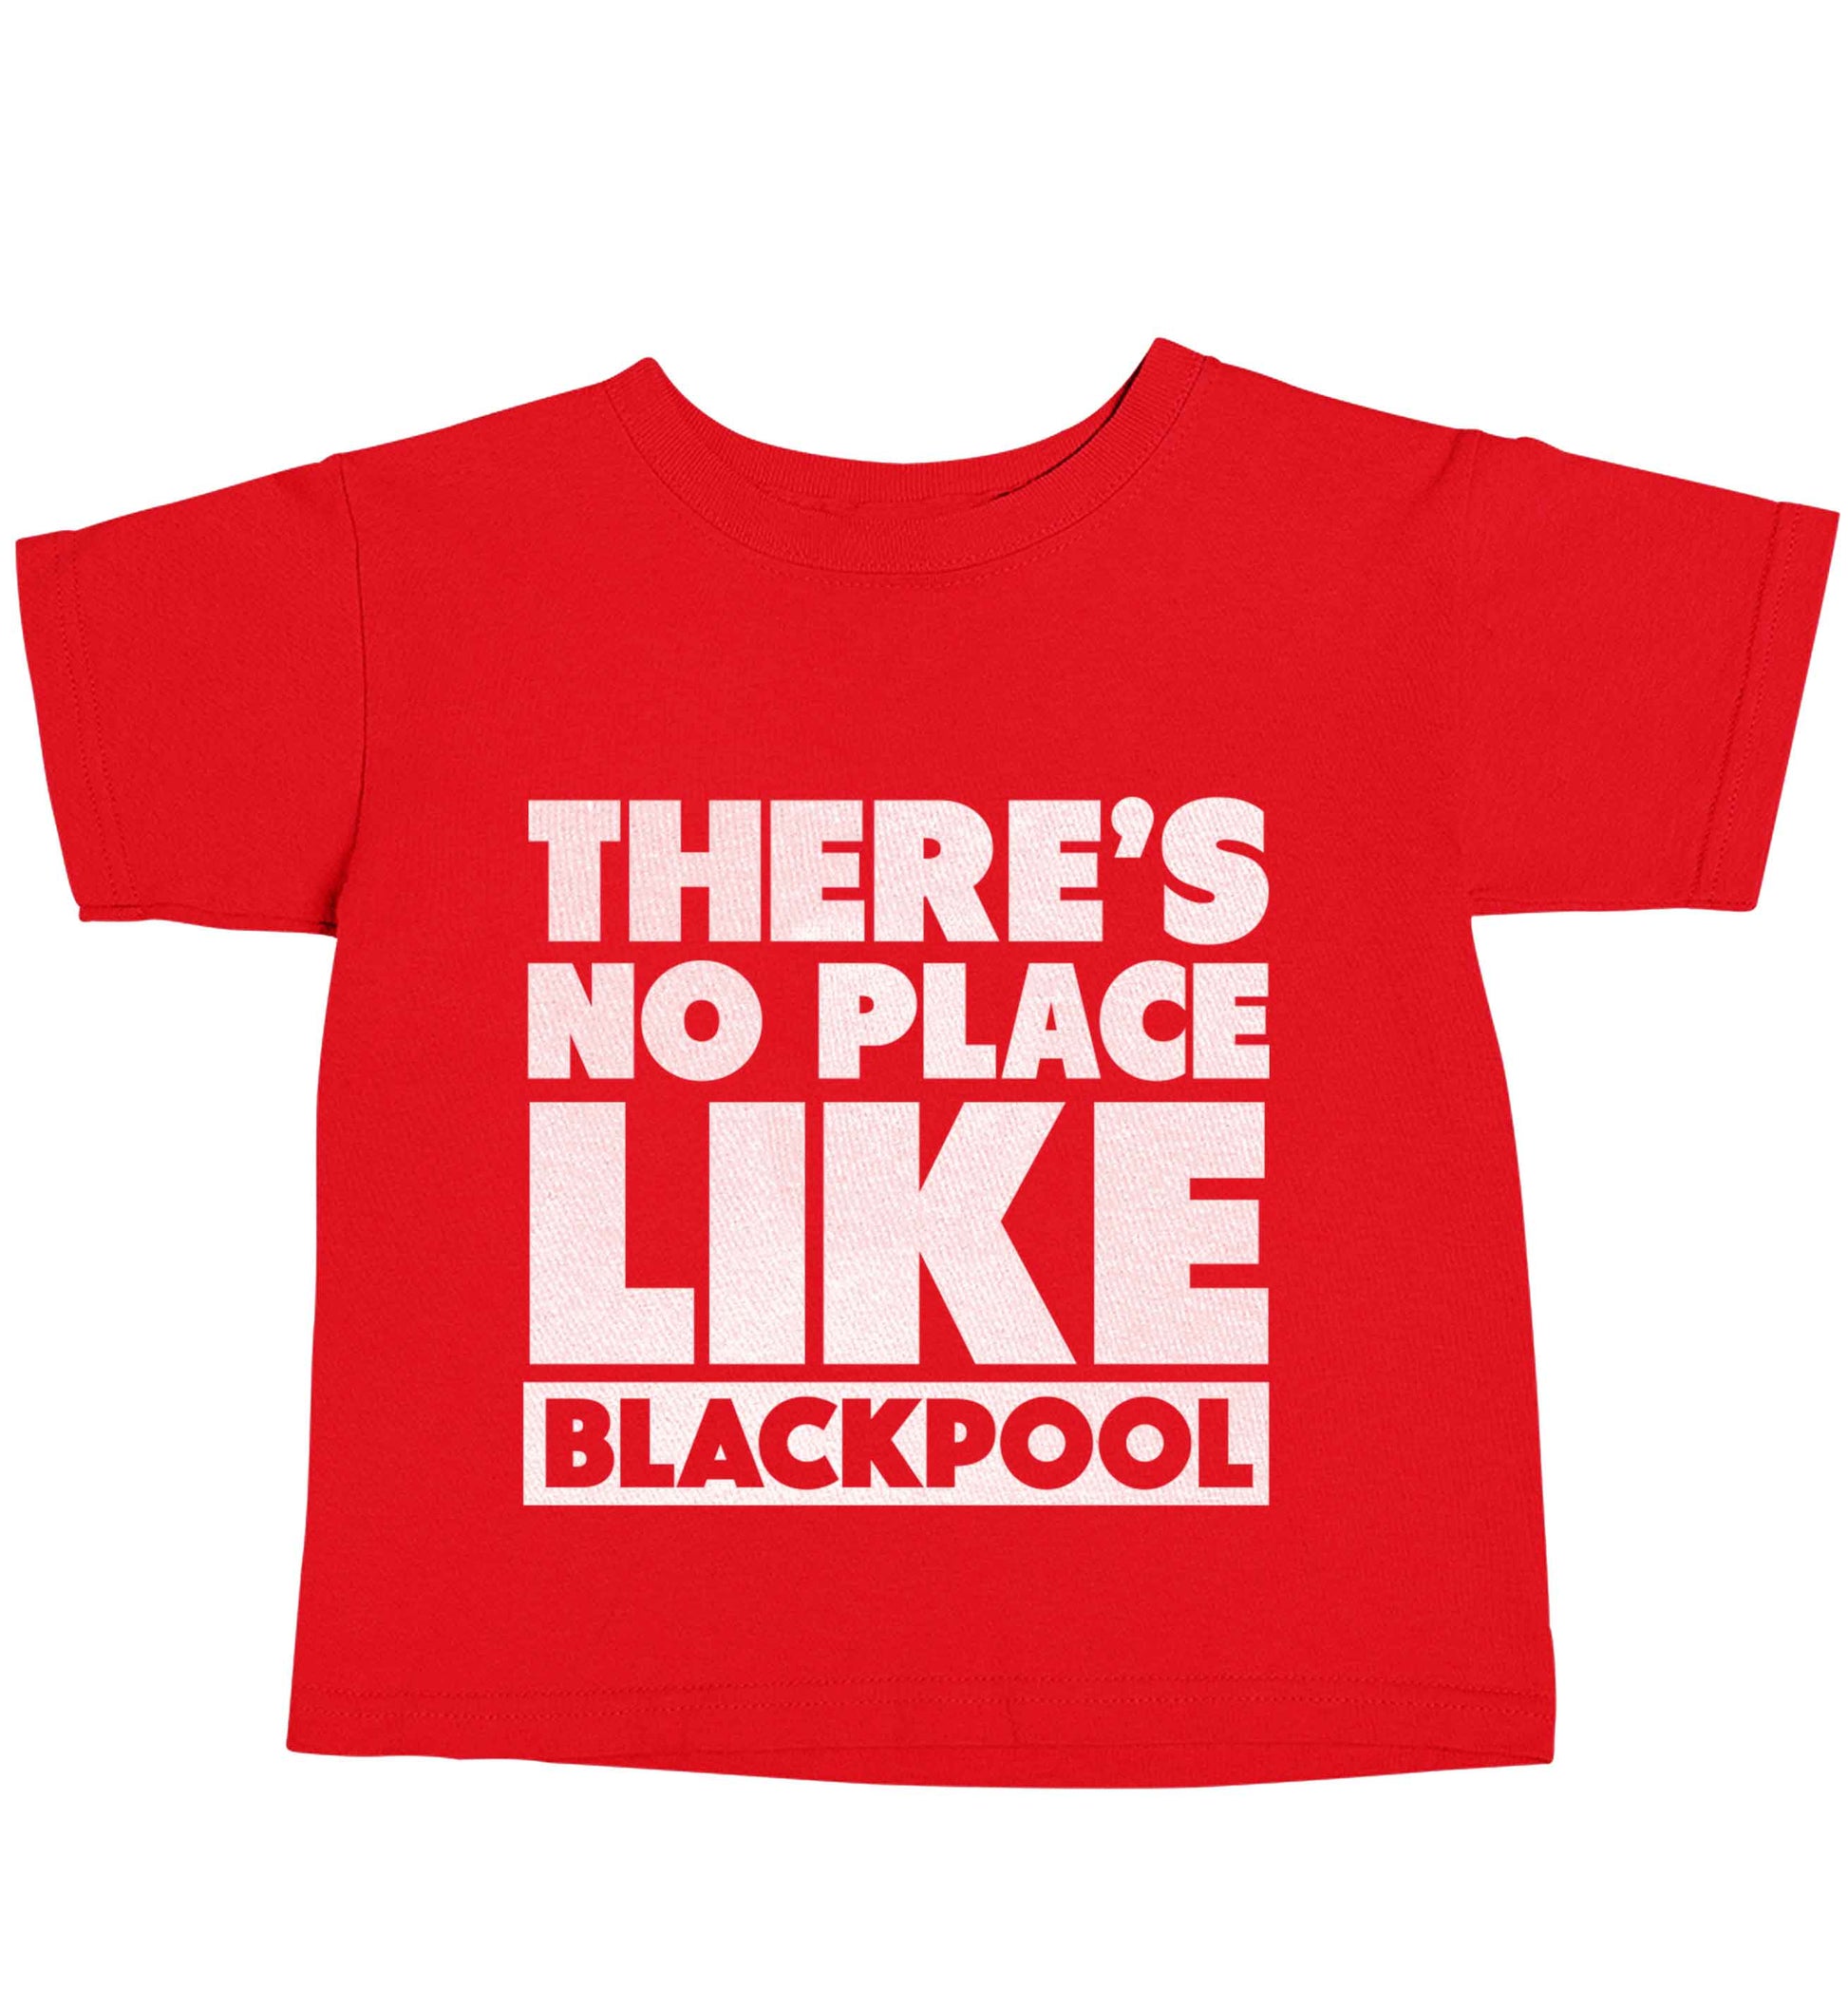 There's no place like Blackpool red baby toddler Tshirt 2 Years